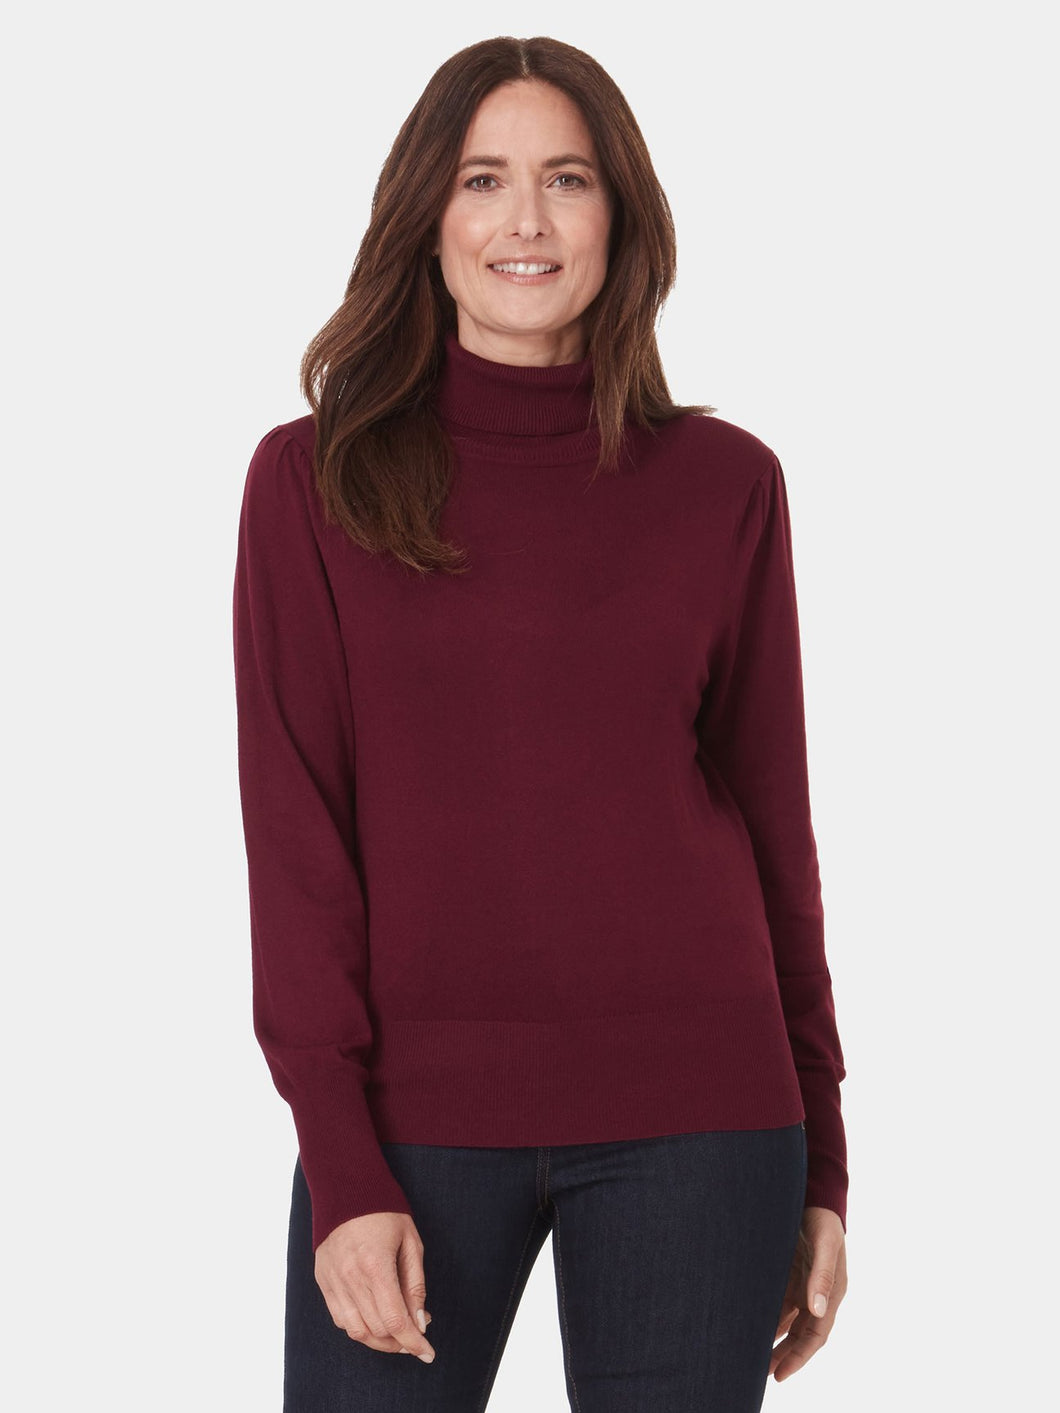 Lois Gayle Long Sleeve Turtleneck Sweater Pullover in Porto